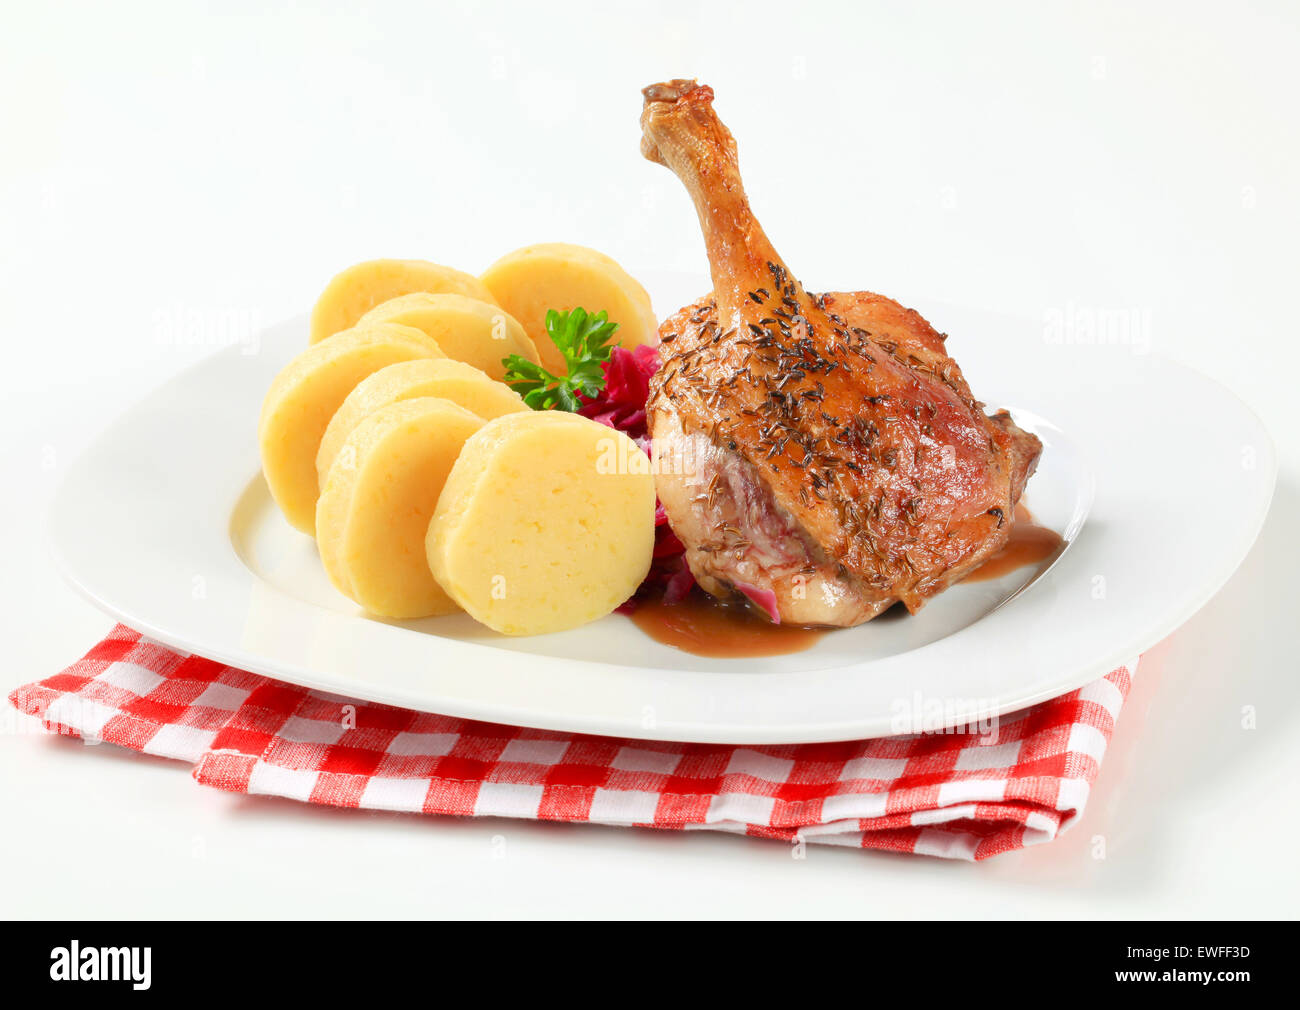 Dish of roast duck leg with potato dumplings and red cabbage Stock Photo